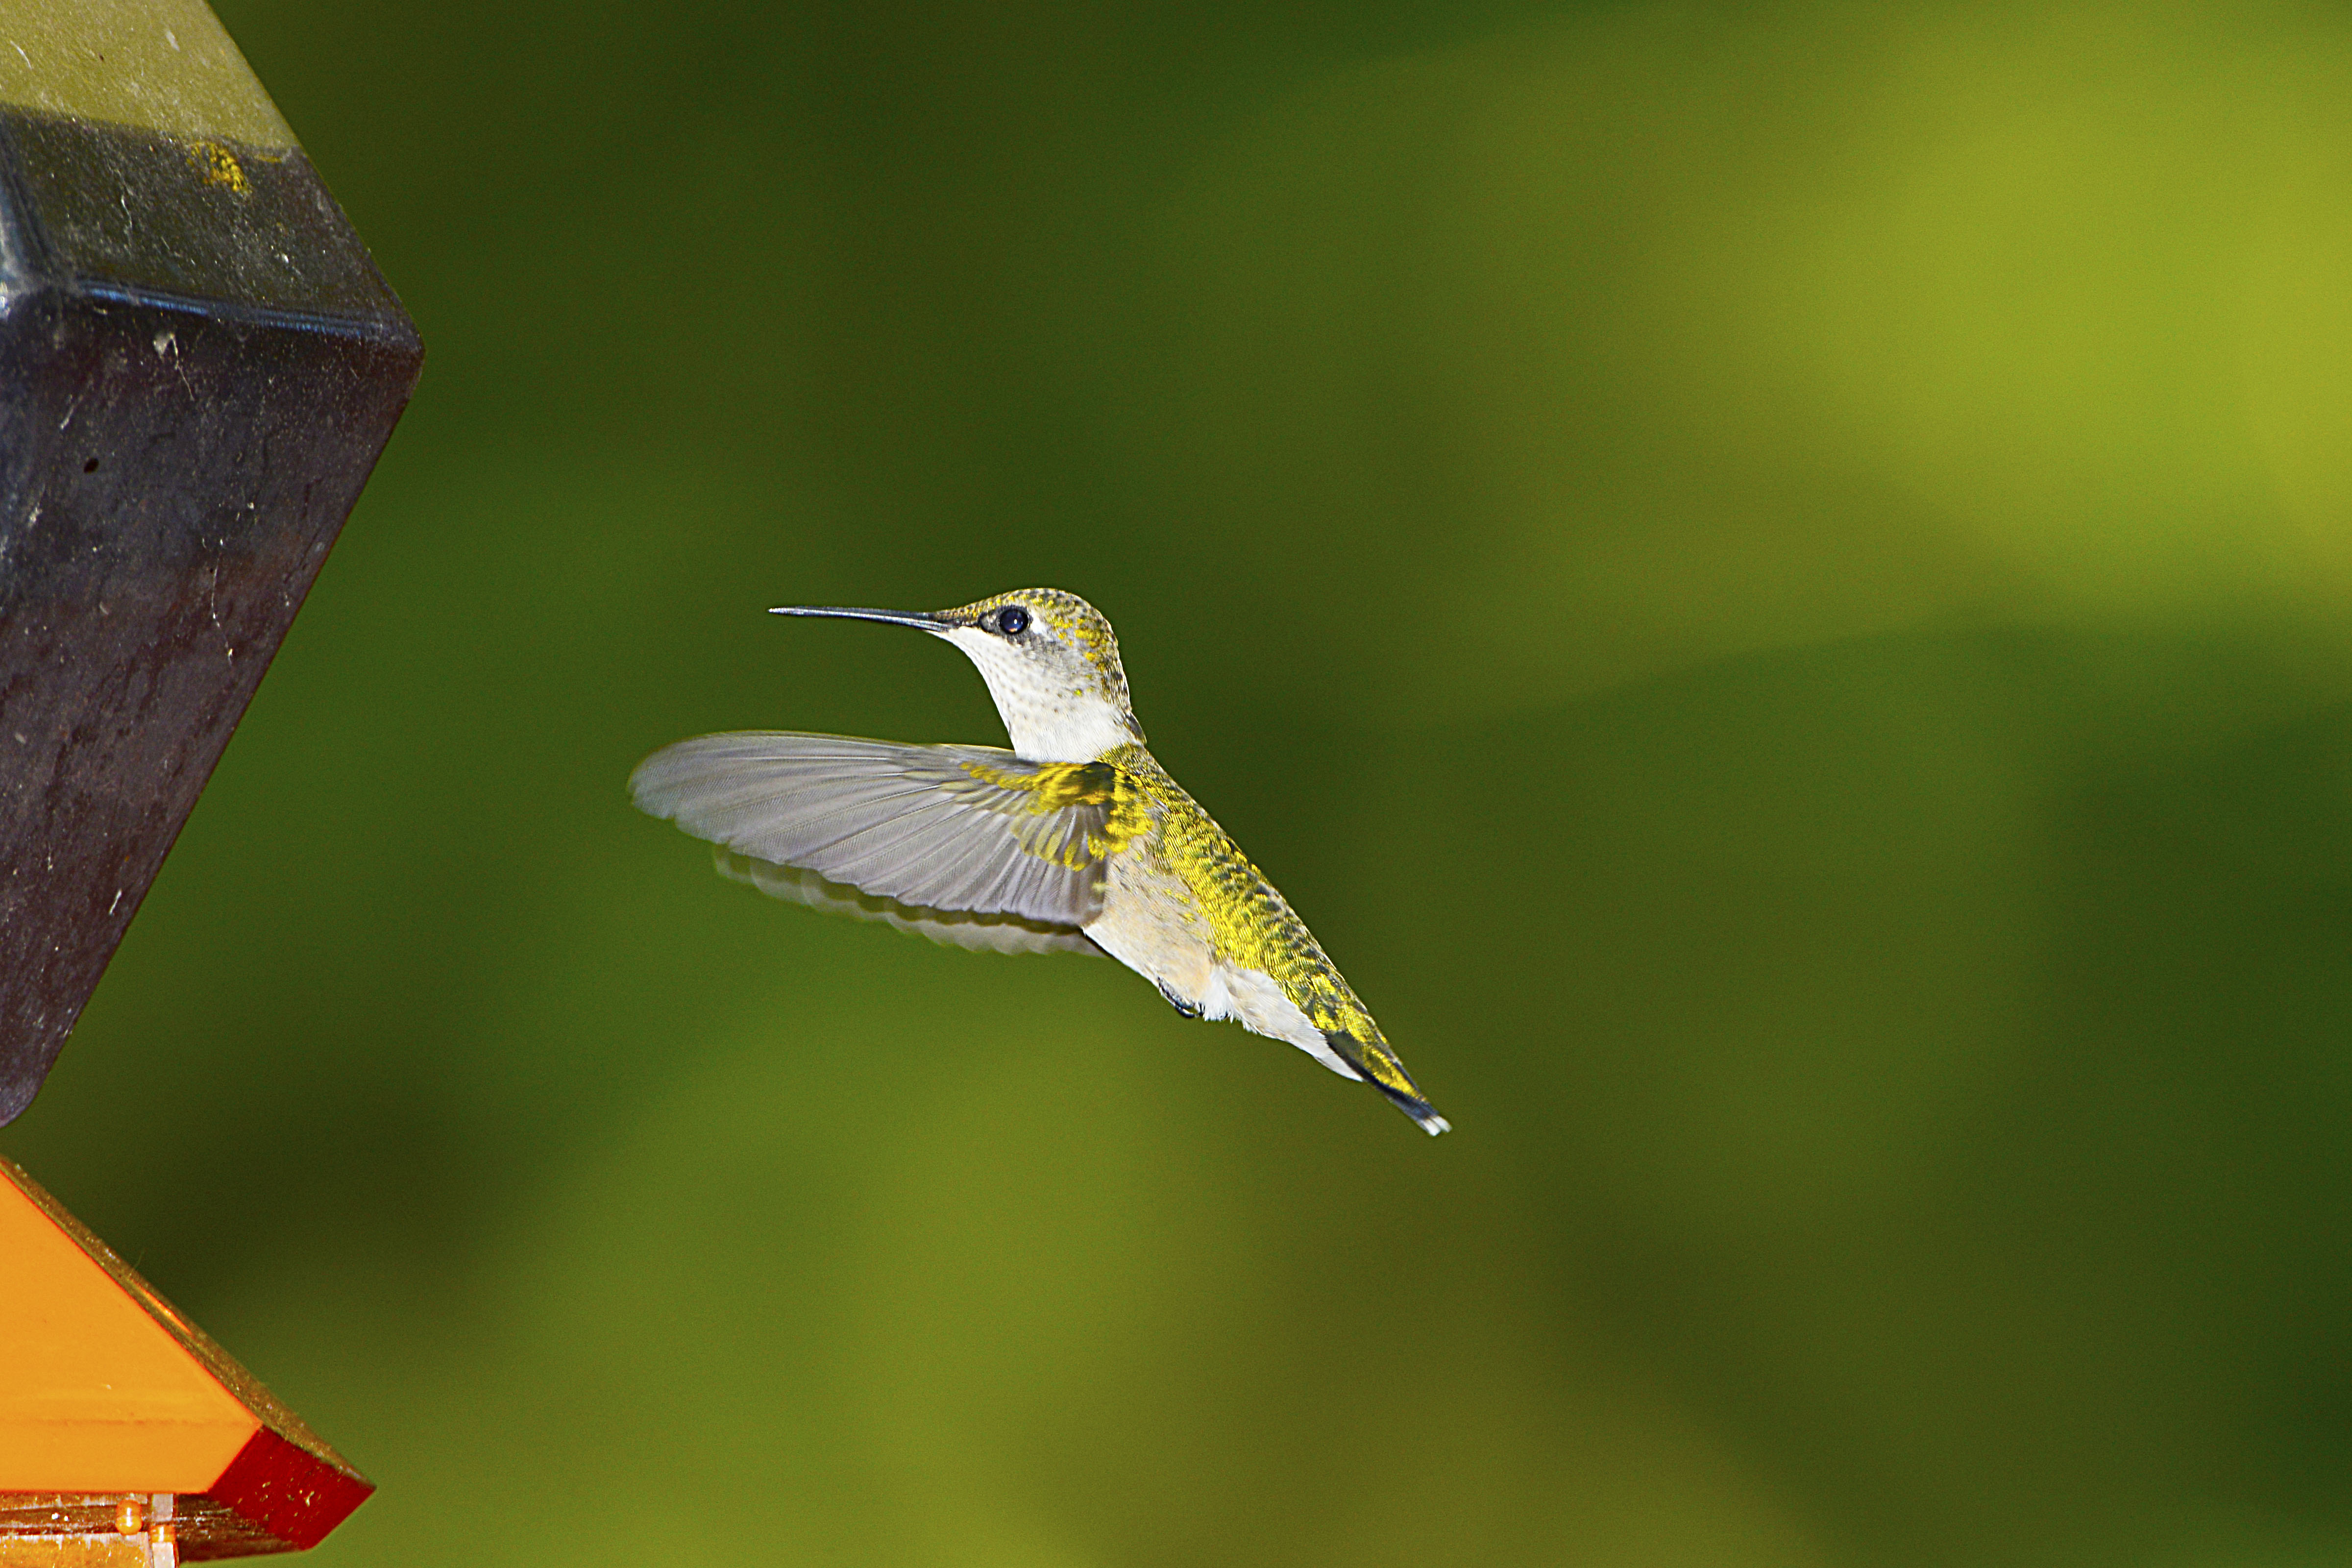 Hummingbird Species Can Fly 1,200 Miles Without Stopping | Time